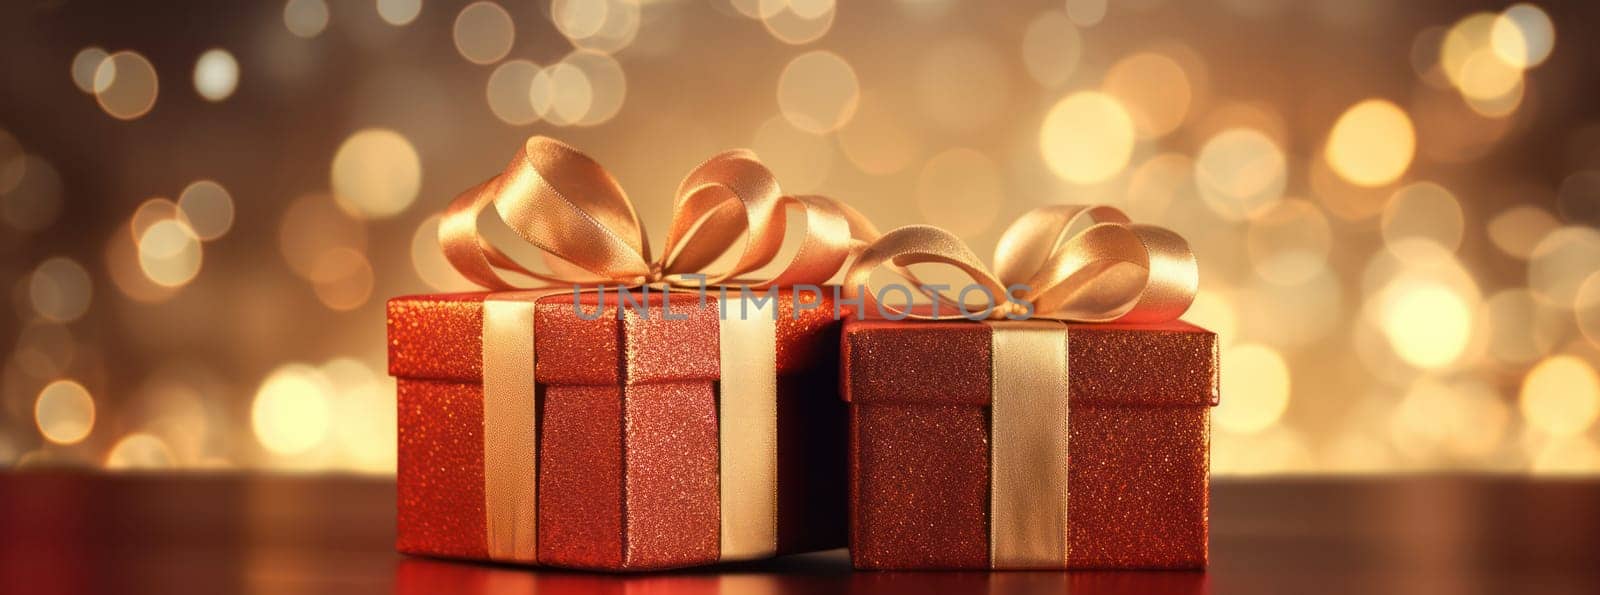 Festive Christmas Surprise: A Decorative Gift Box with Bright Bow and Ribbon, Illuminated by Bokeh Lights on a Beautiful Blue Winter Background.